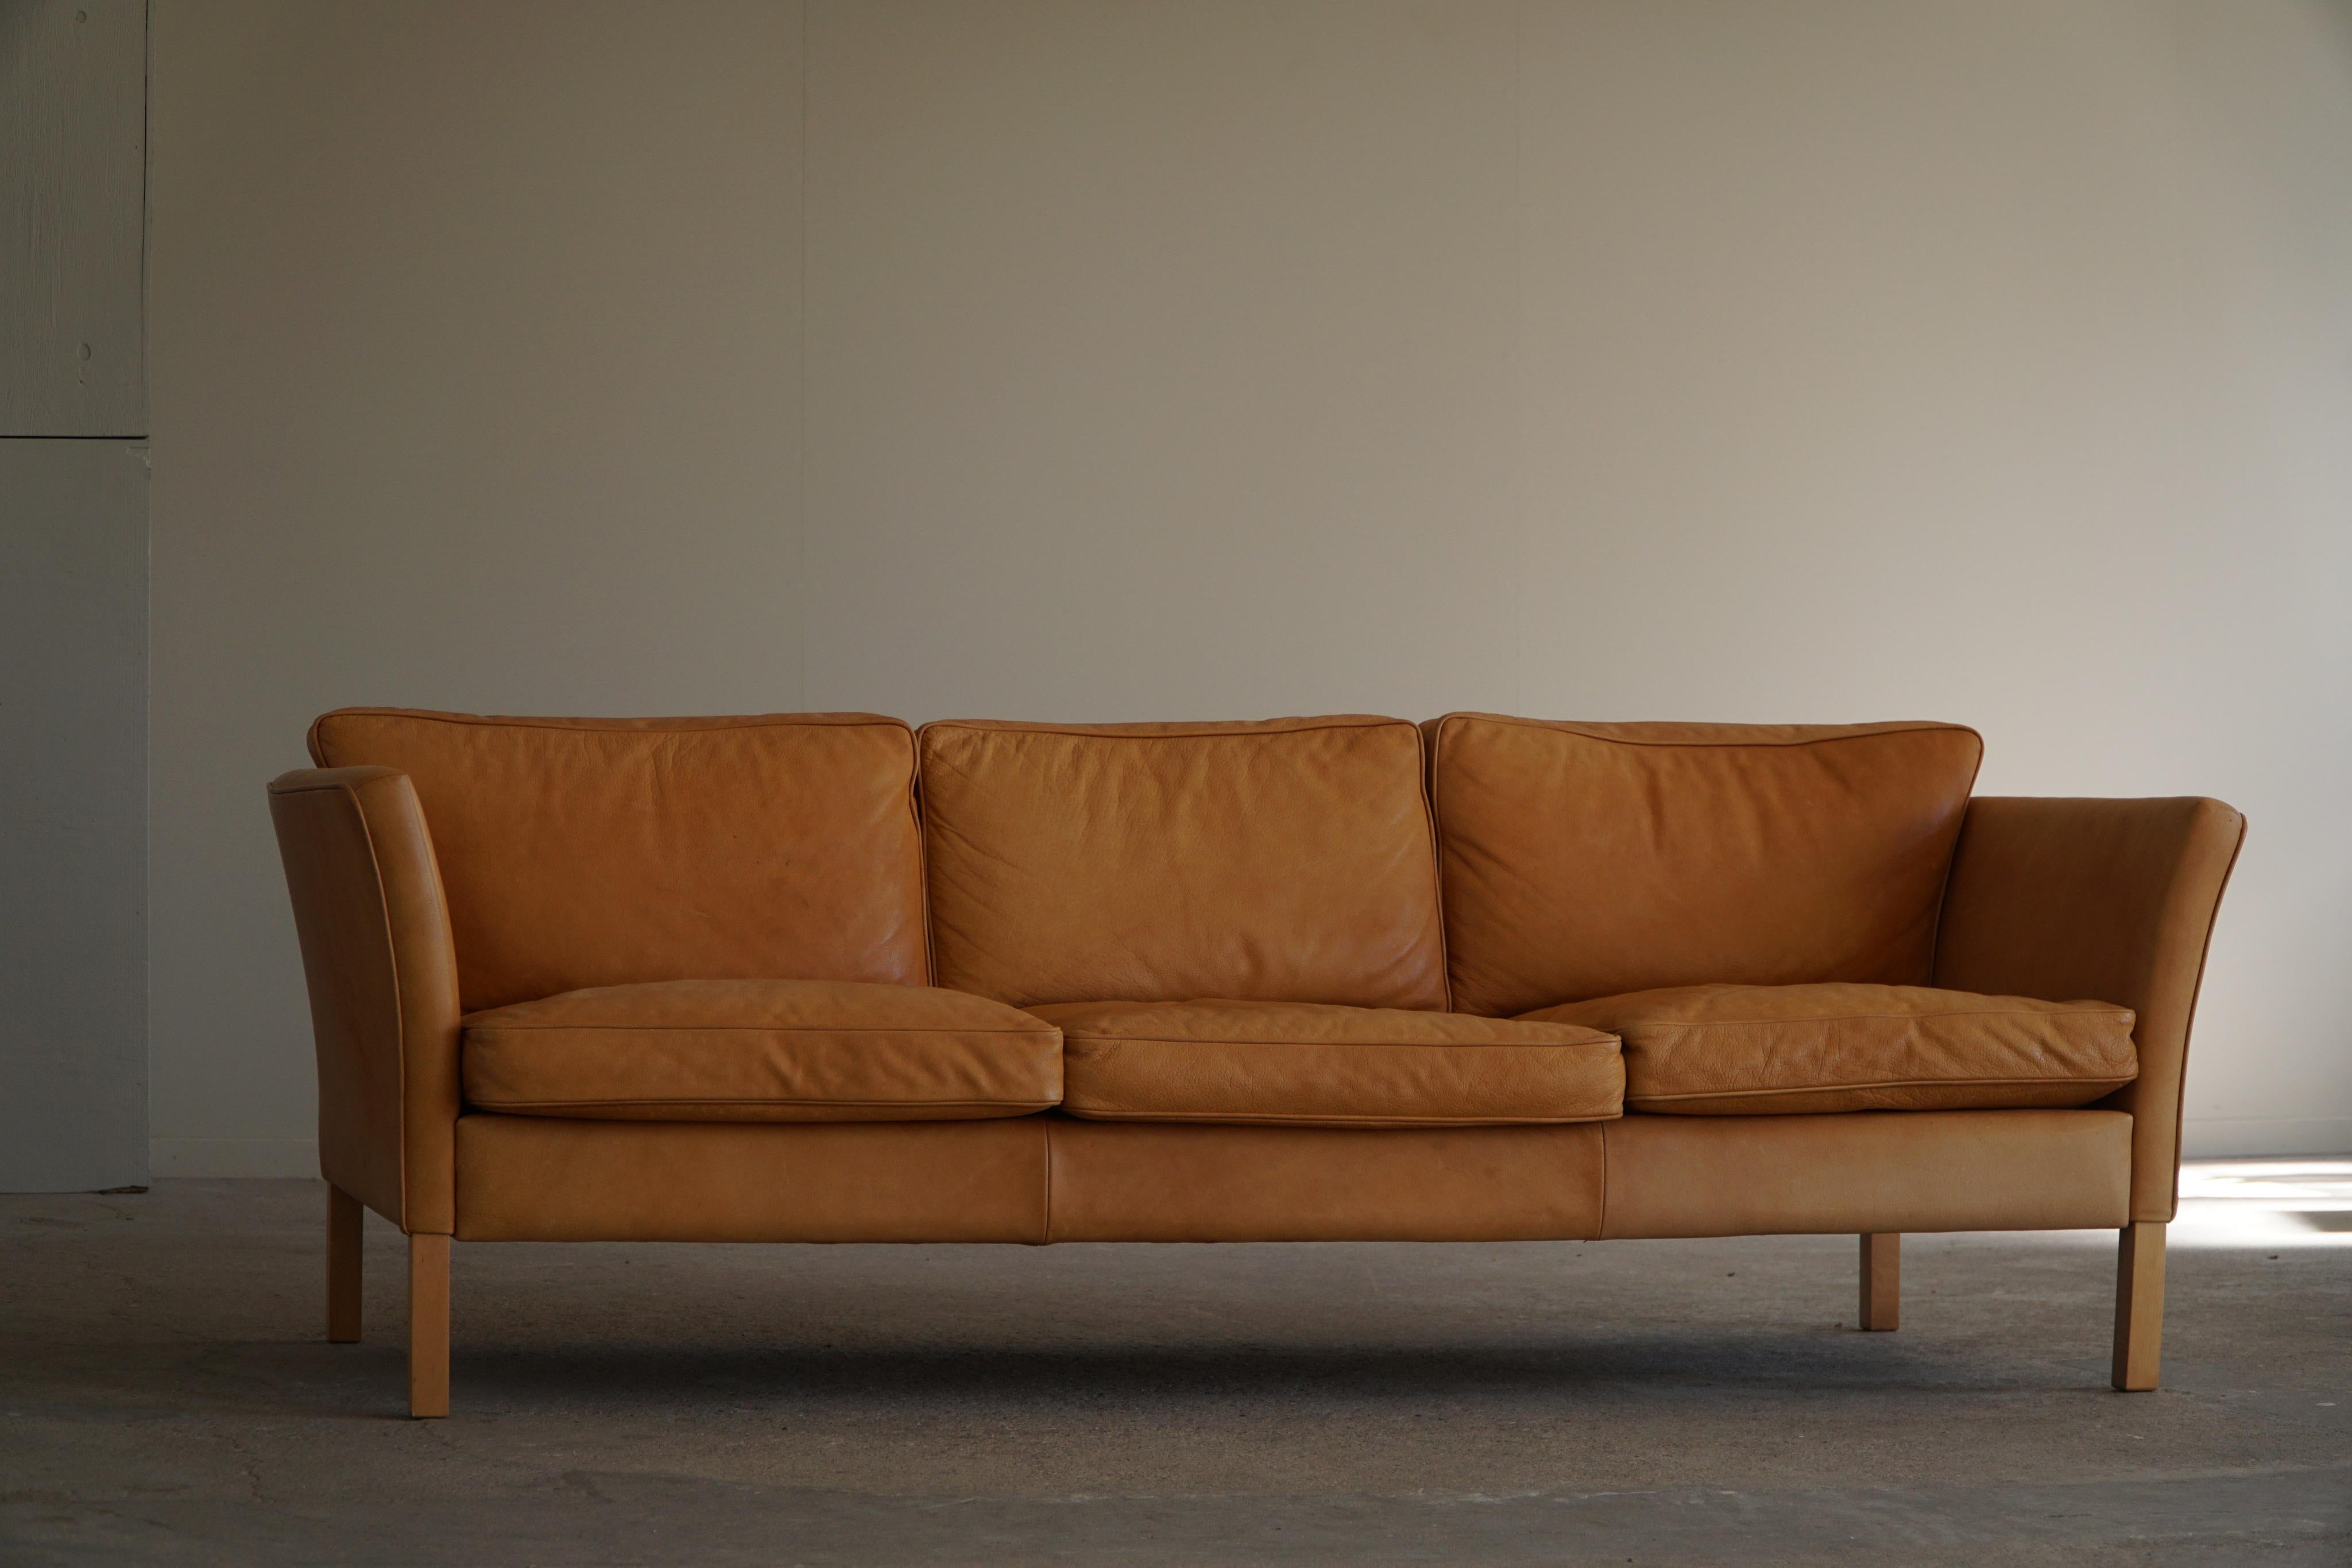 Danish Midcentury Stouby 3-Seater Sofa in Cognac Brown Leather, Made in 1970s In Good Condition For Sale In Odense, DK